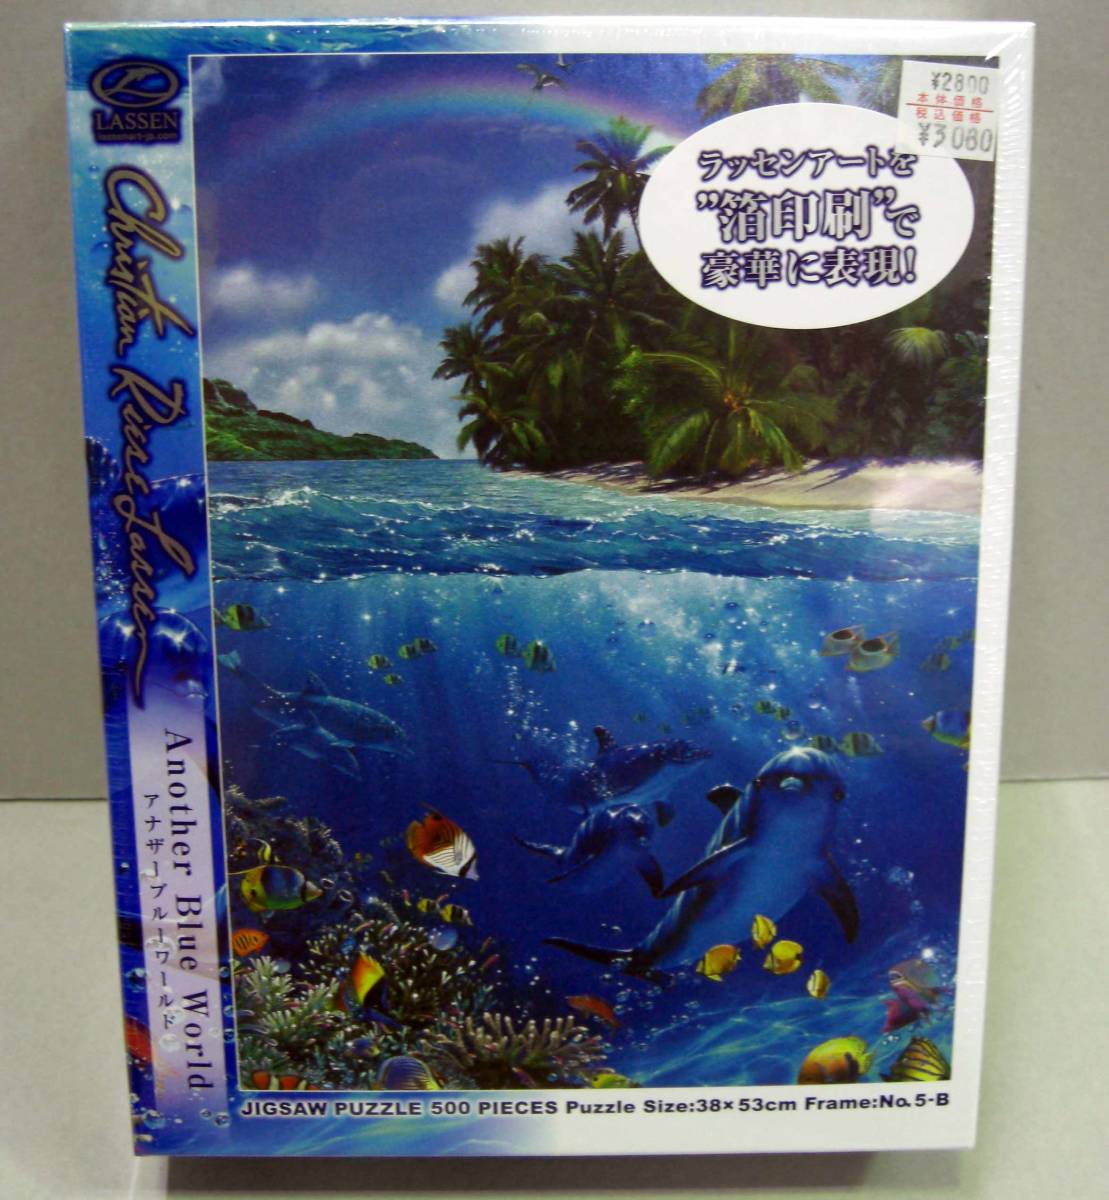 ☆Popular work Lassen Another Blue World 500 pieces, toy, game, puzzle, jigsaw puzzle